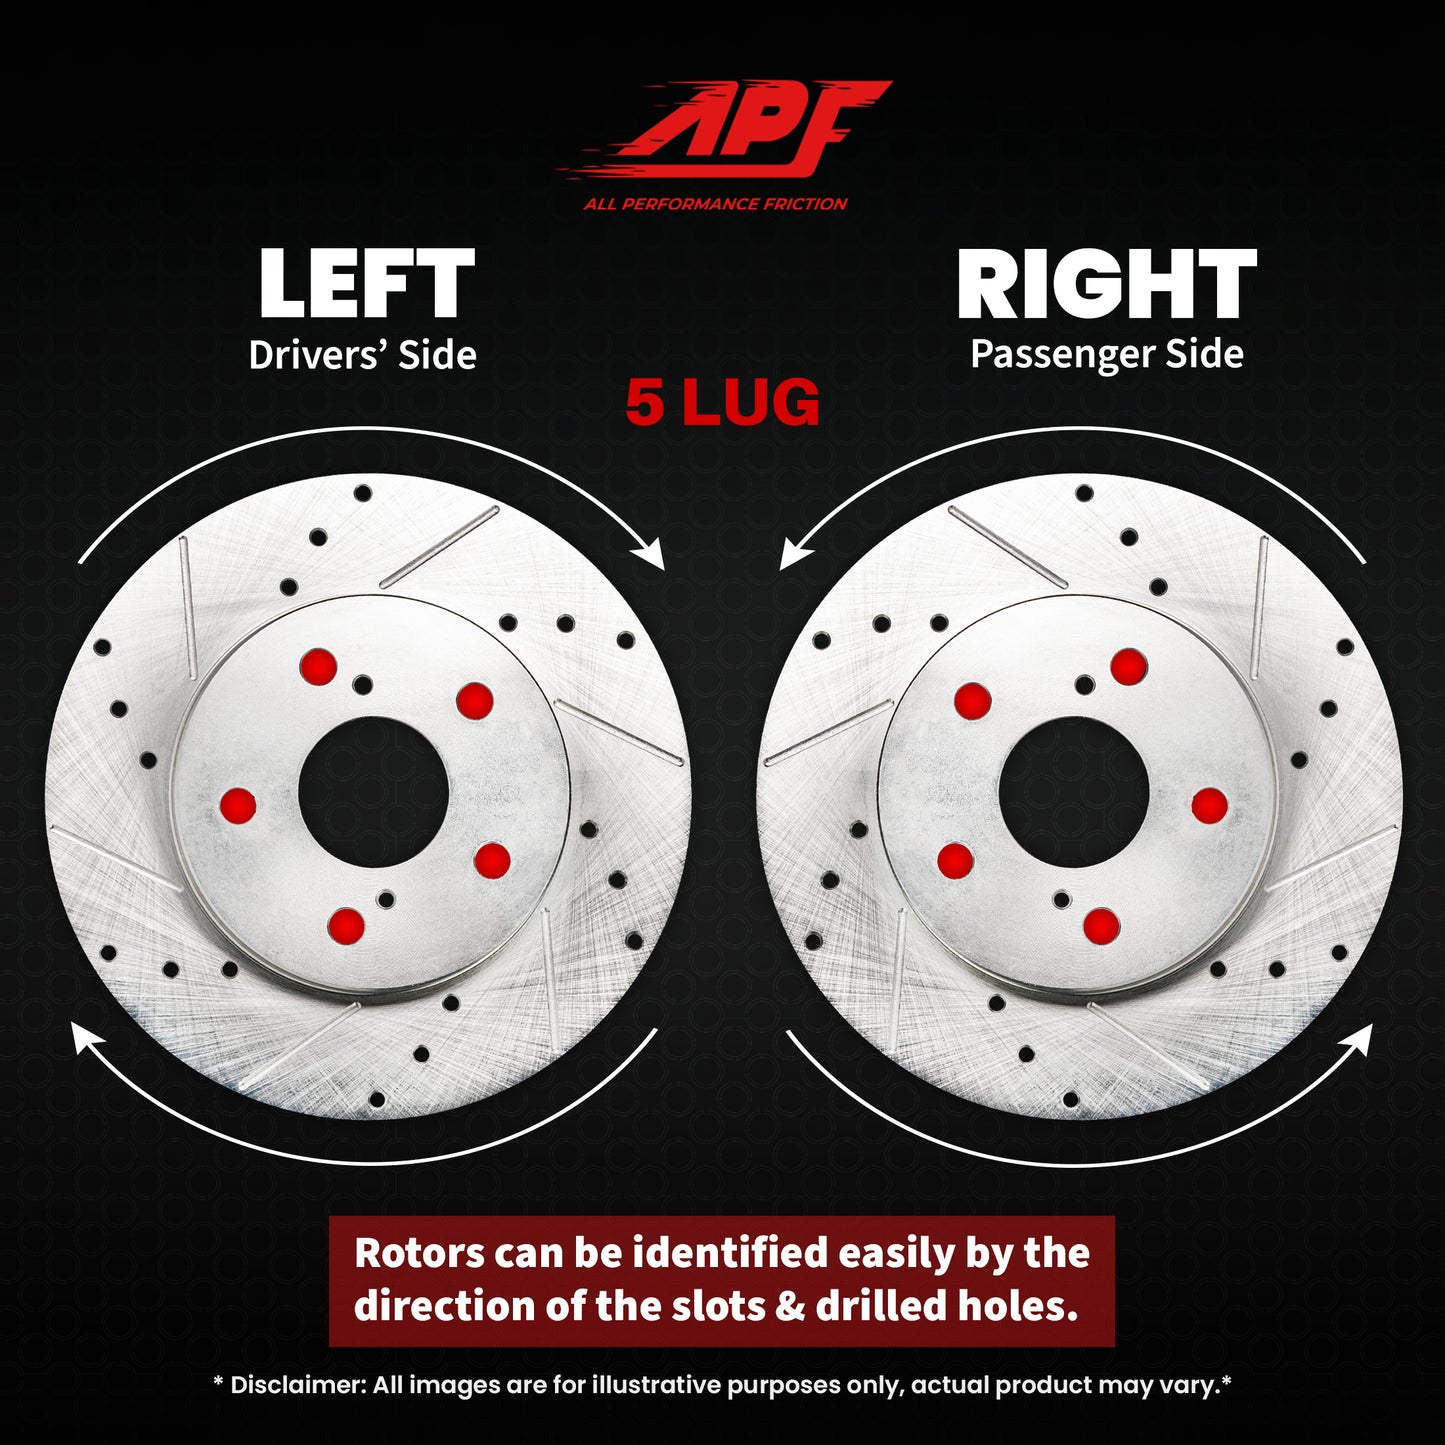 APF All Performance Friction Rear Rotors and Pads Half Kit compatible with Hyundai Elantra 2007-2010 Zinc Drilled Slotted Rotors with Ceramic Carbon Fiber Brake Pads | $97.31